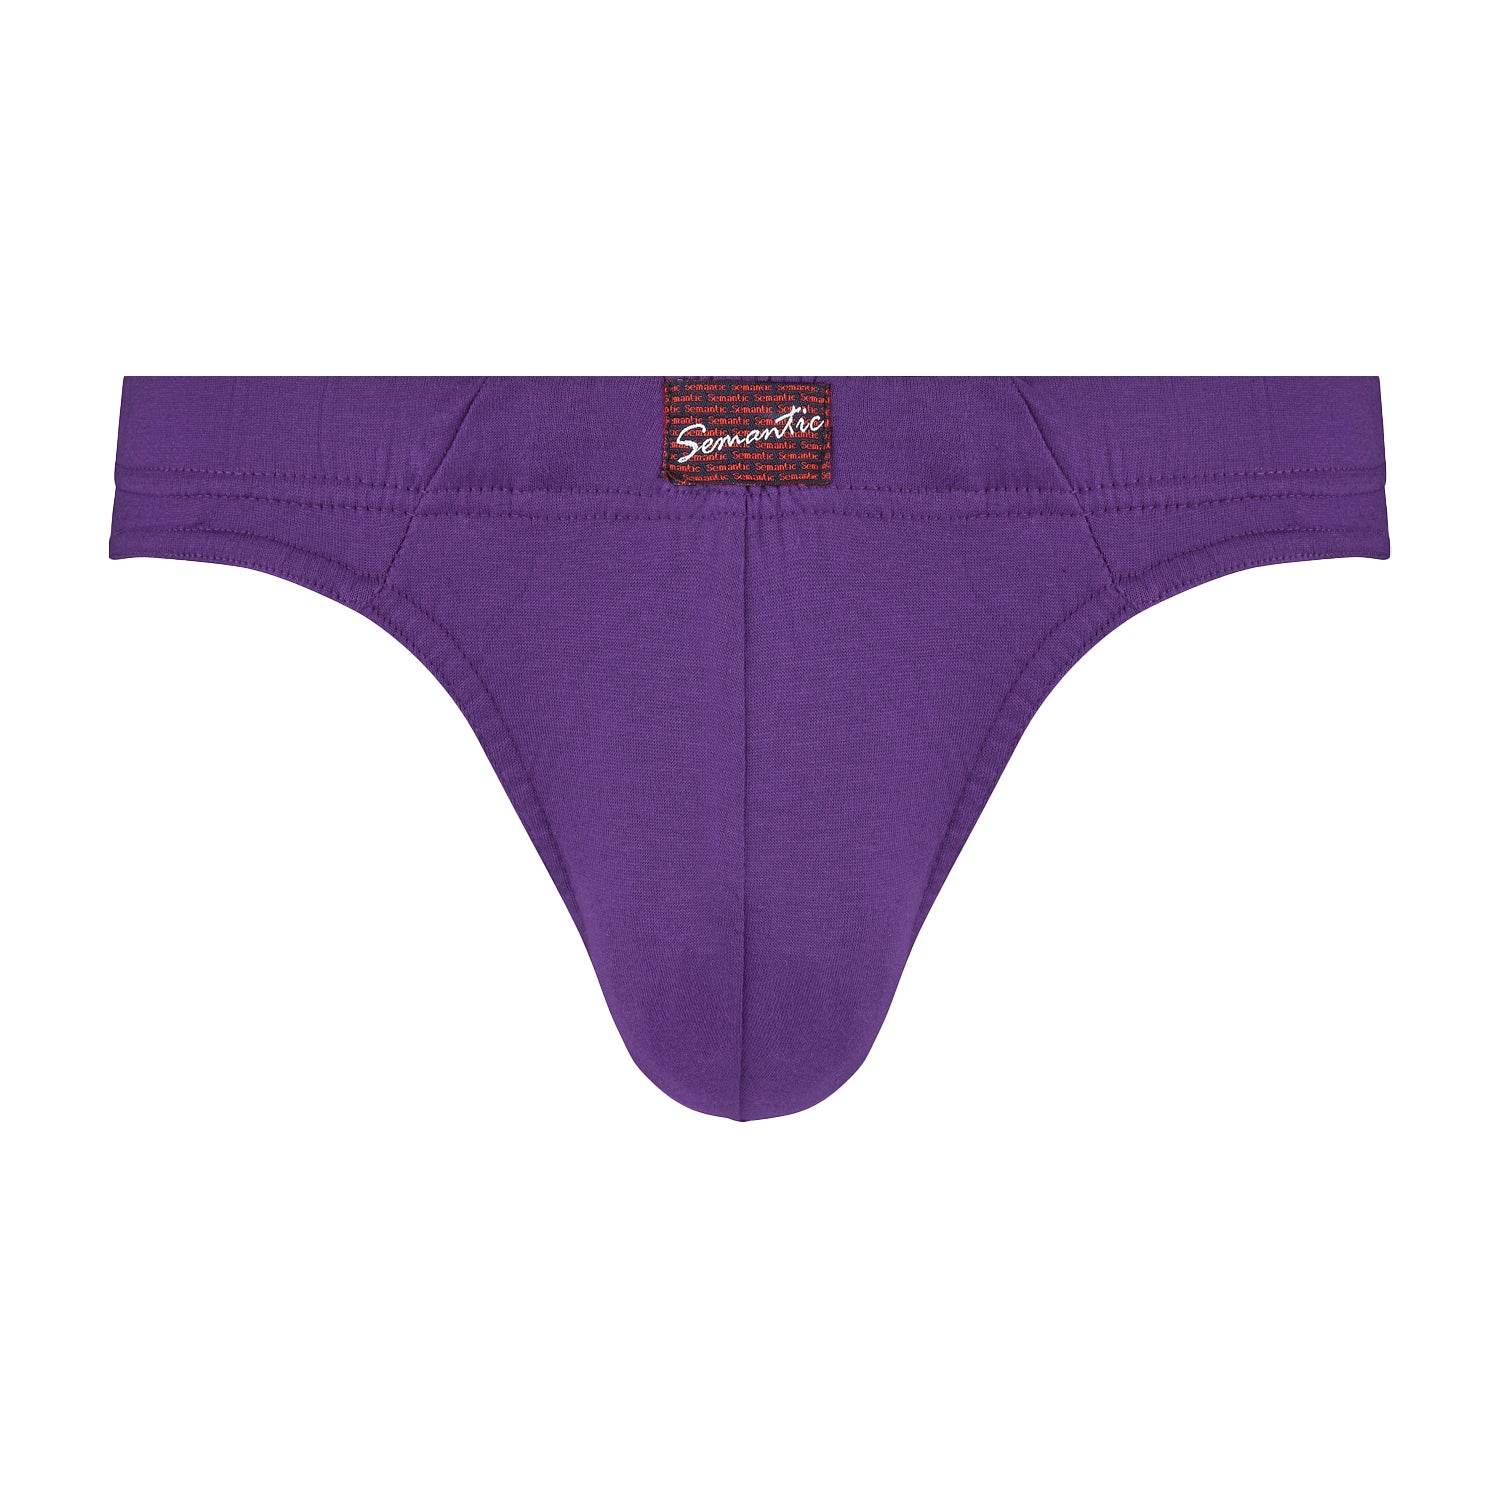 What is the best selling color of women panties? - Quora